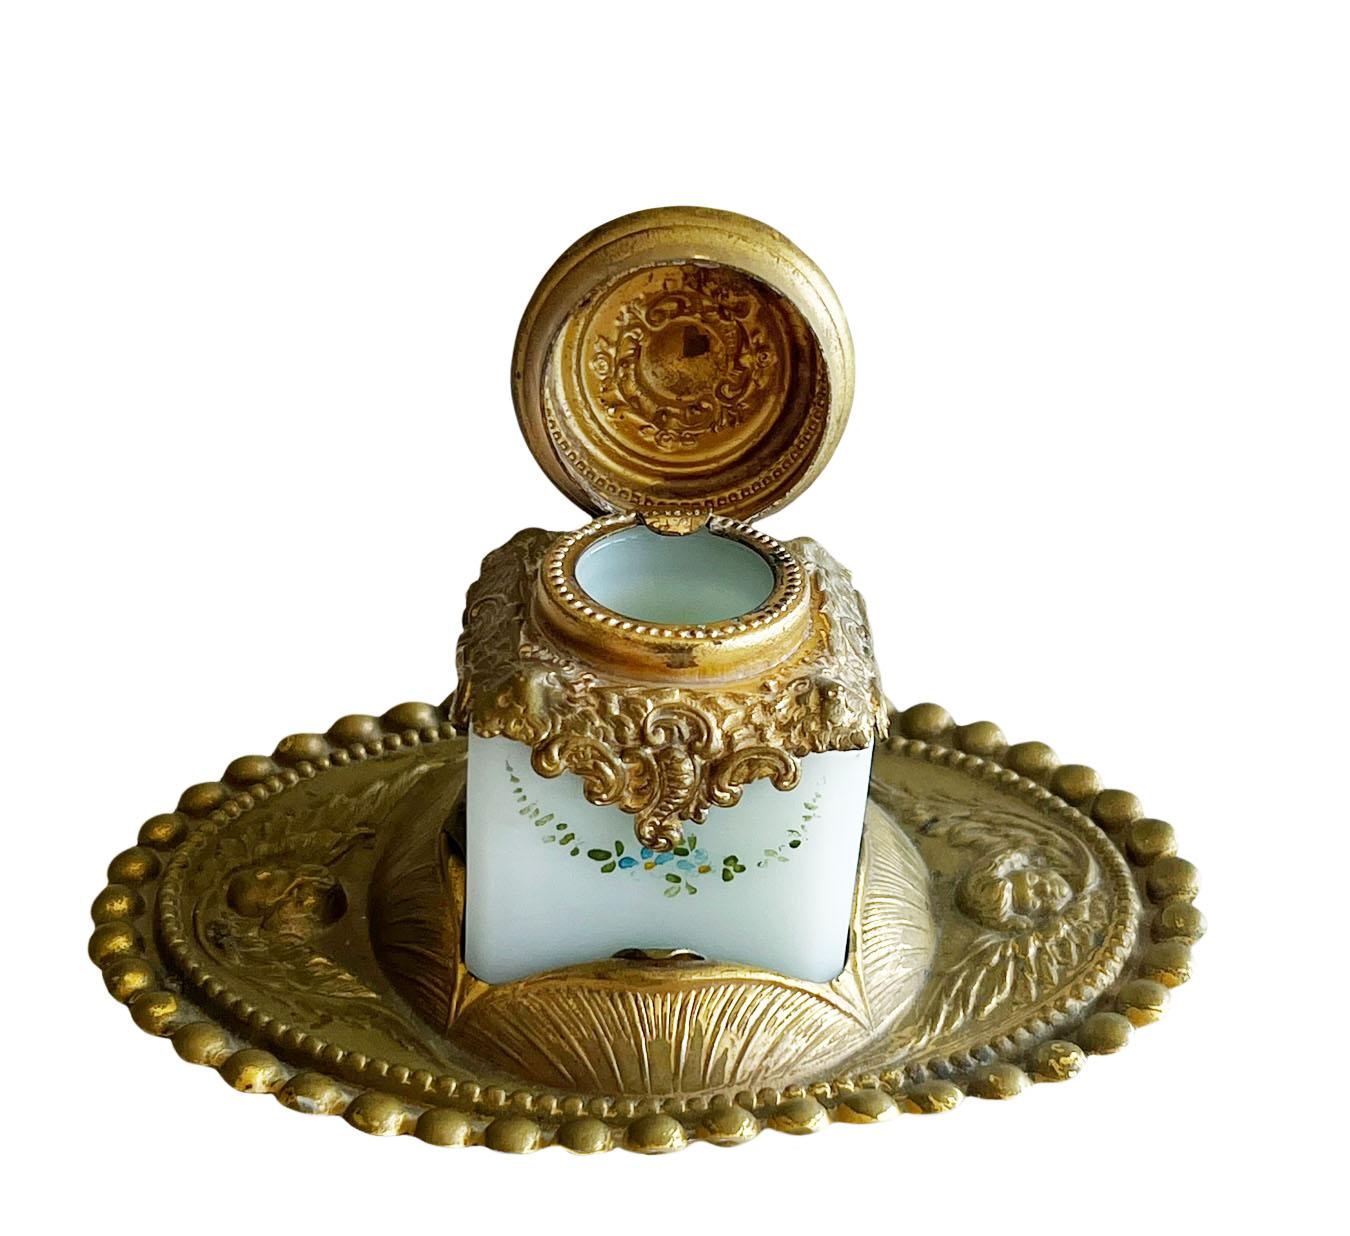 A beautiful pale blue opaline inkwell with small hand painted flowers. With an antique brass top and incased into the brass base. The base has angle heads on either side of the ink bottle. The inkwell appears to have never been used.